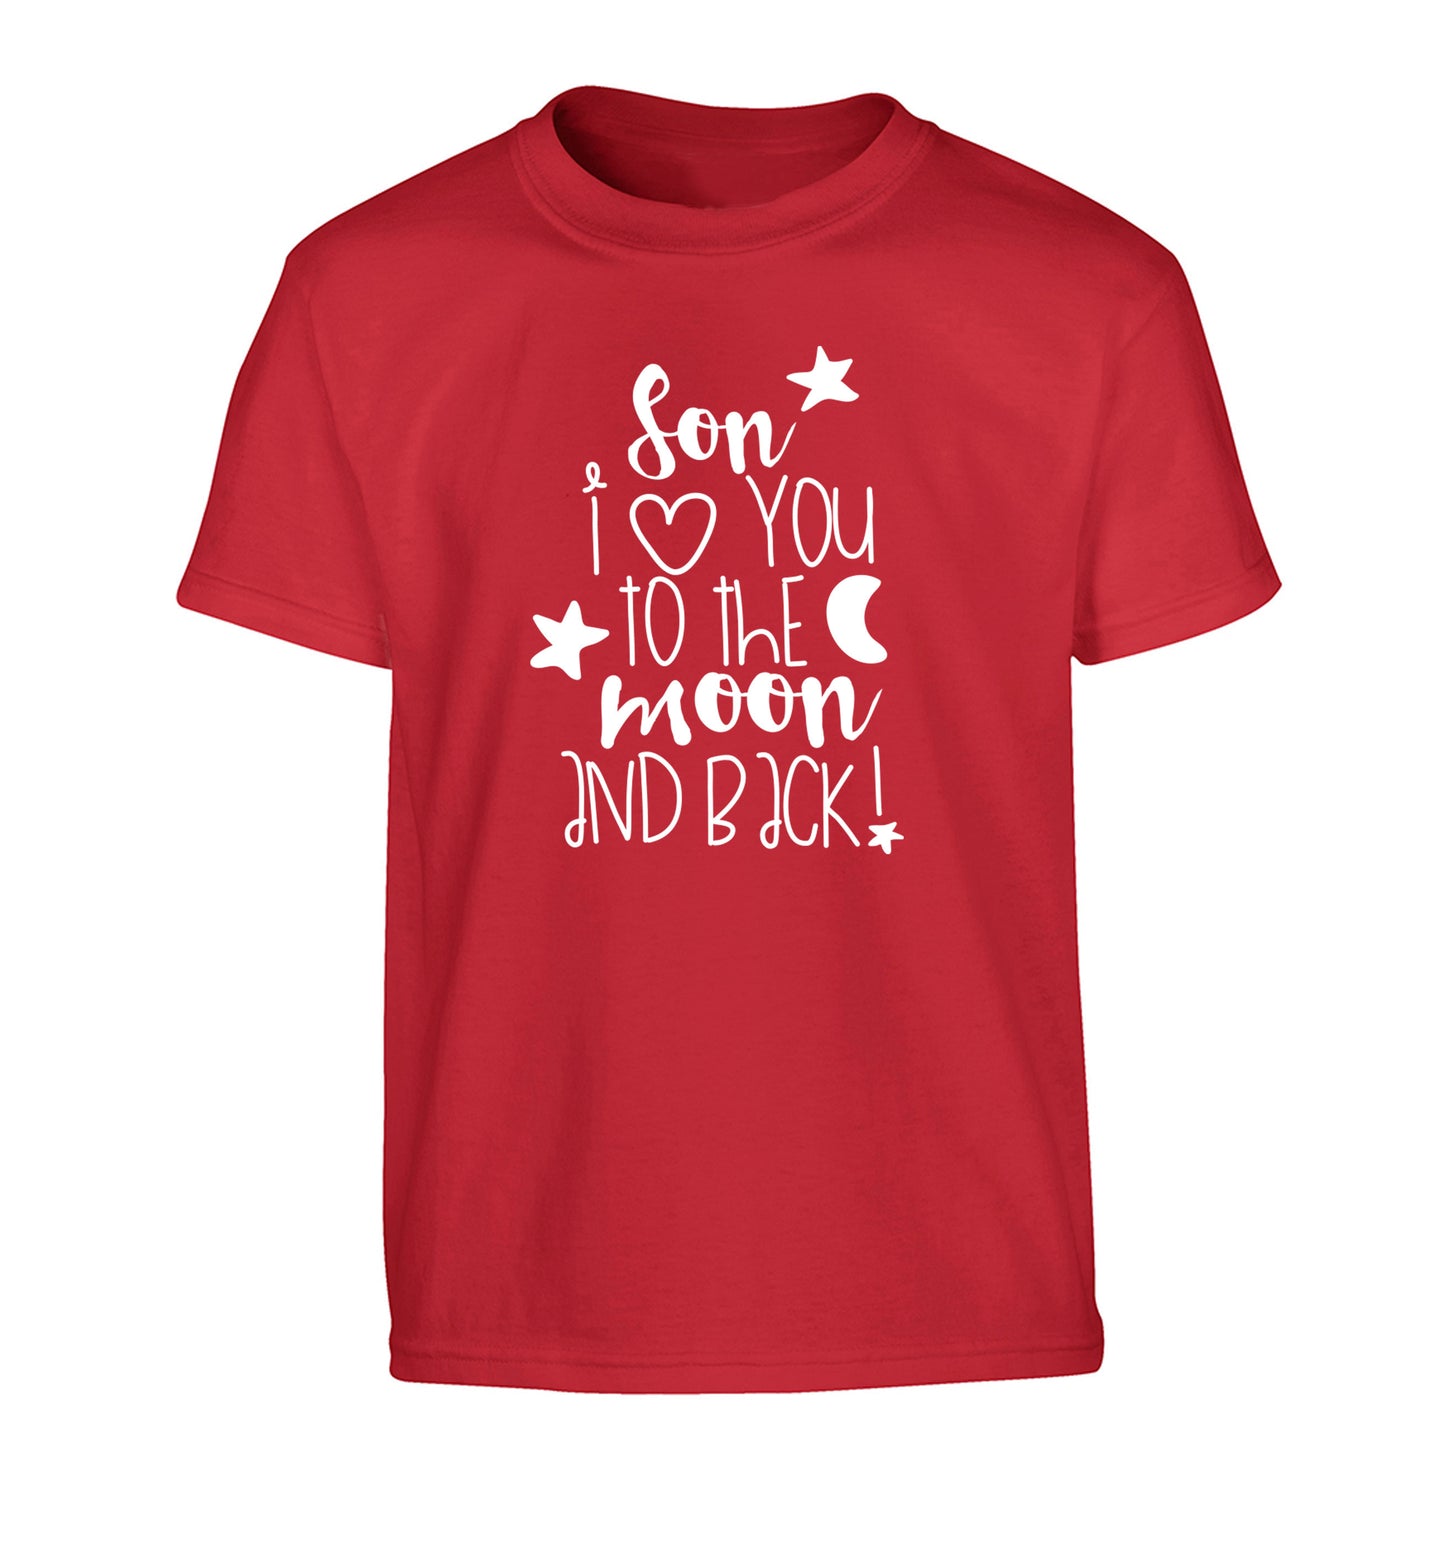 Son I love you to the moon and back Children's red Tshirt 12-14 Years